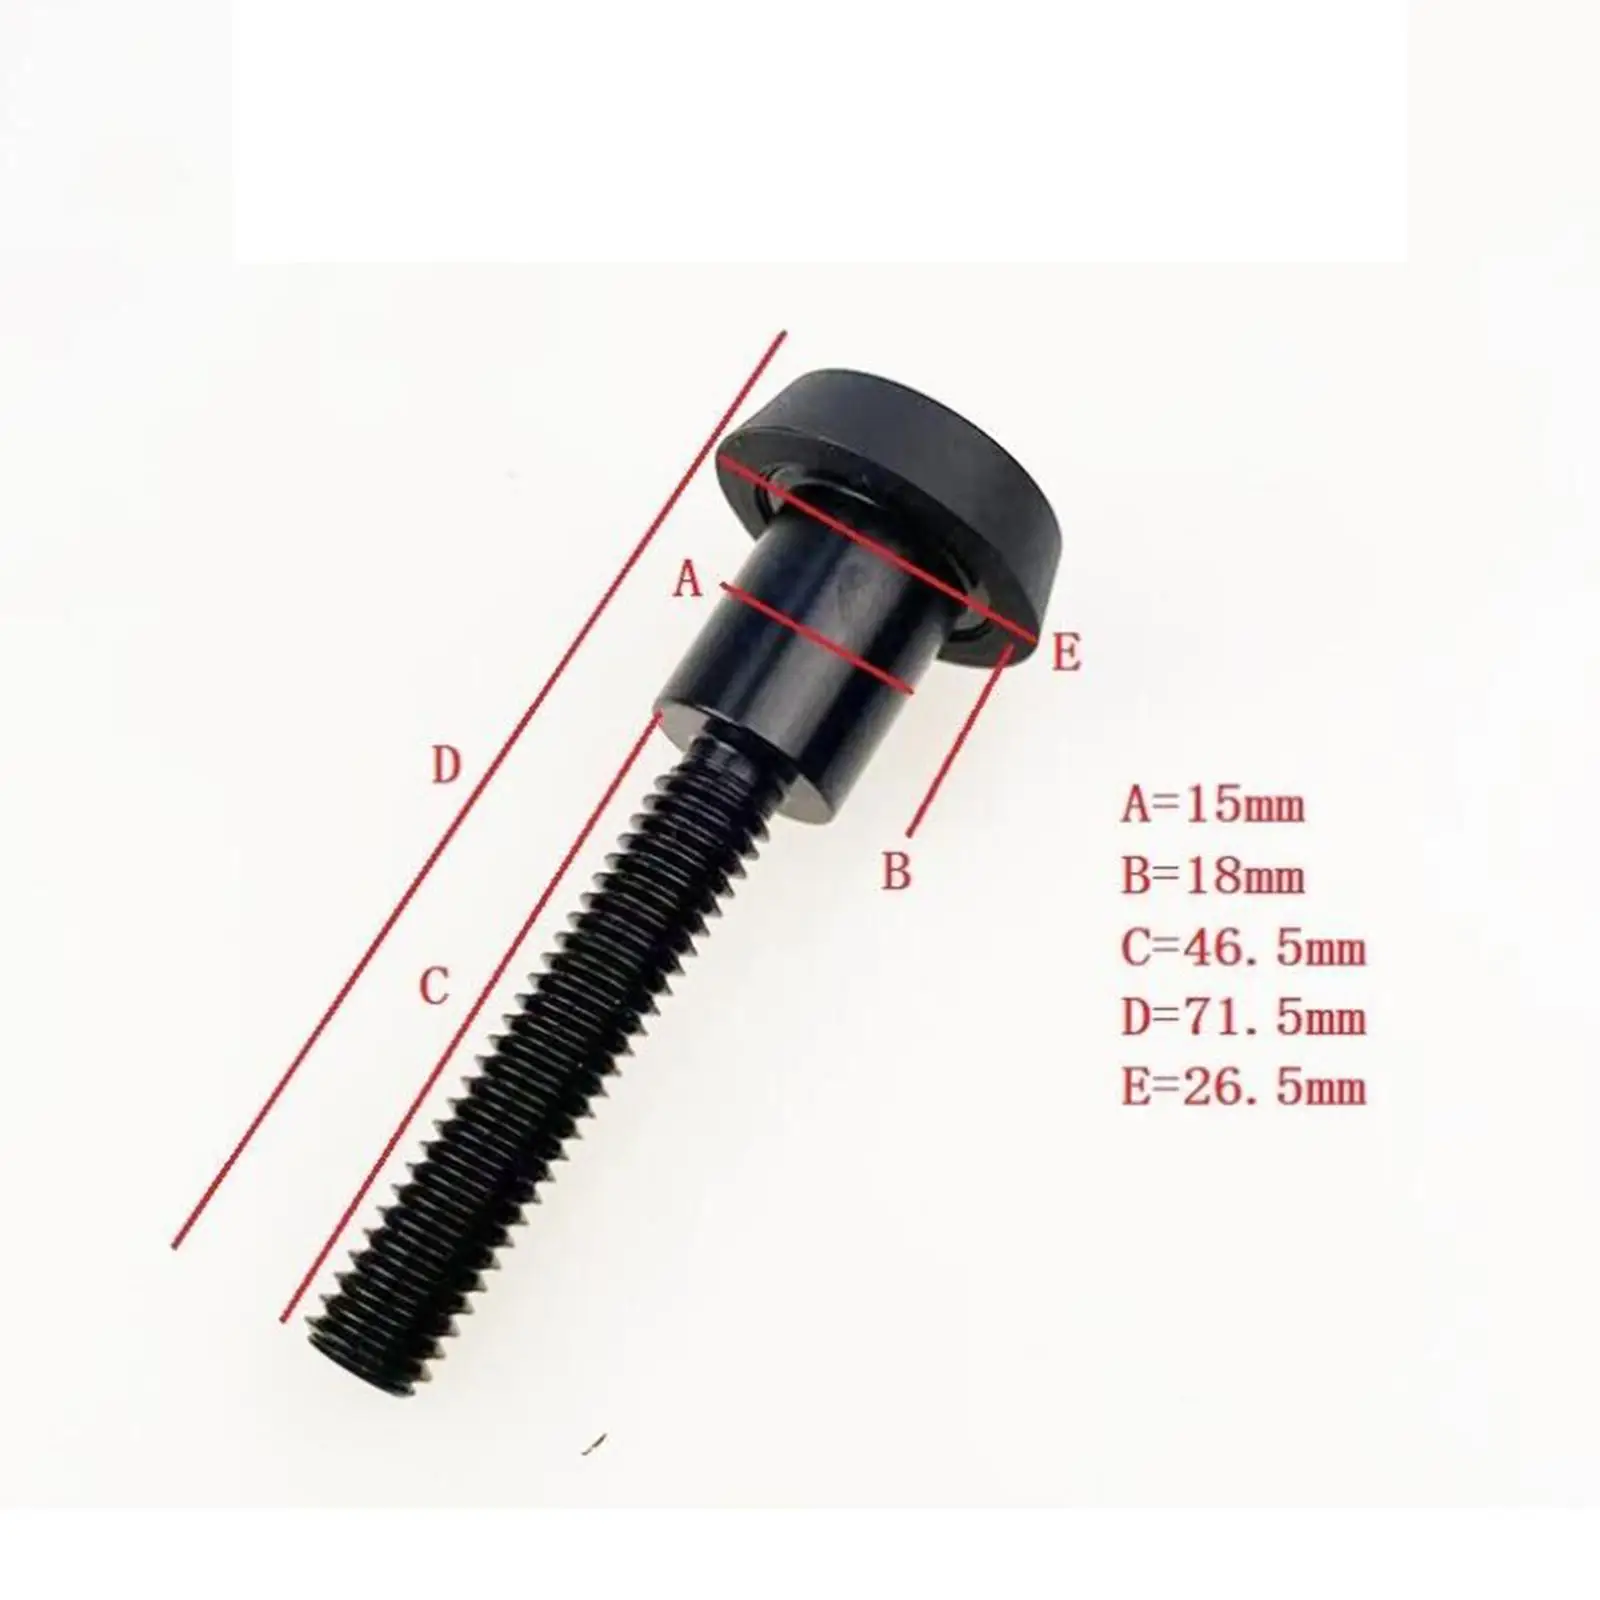 Billiard Cue Extension Bumper Pool Cue Extension Connected Back Plug Screw Replacement Part for Billiard Cue